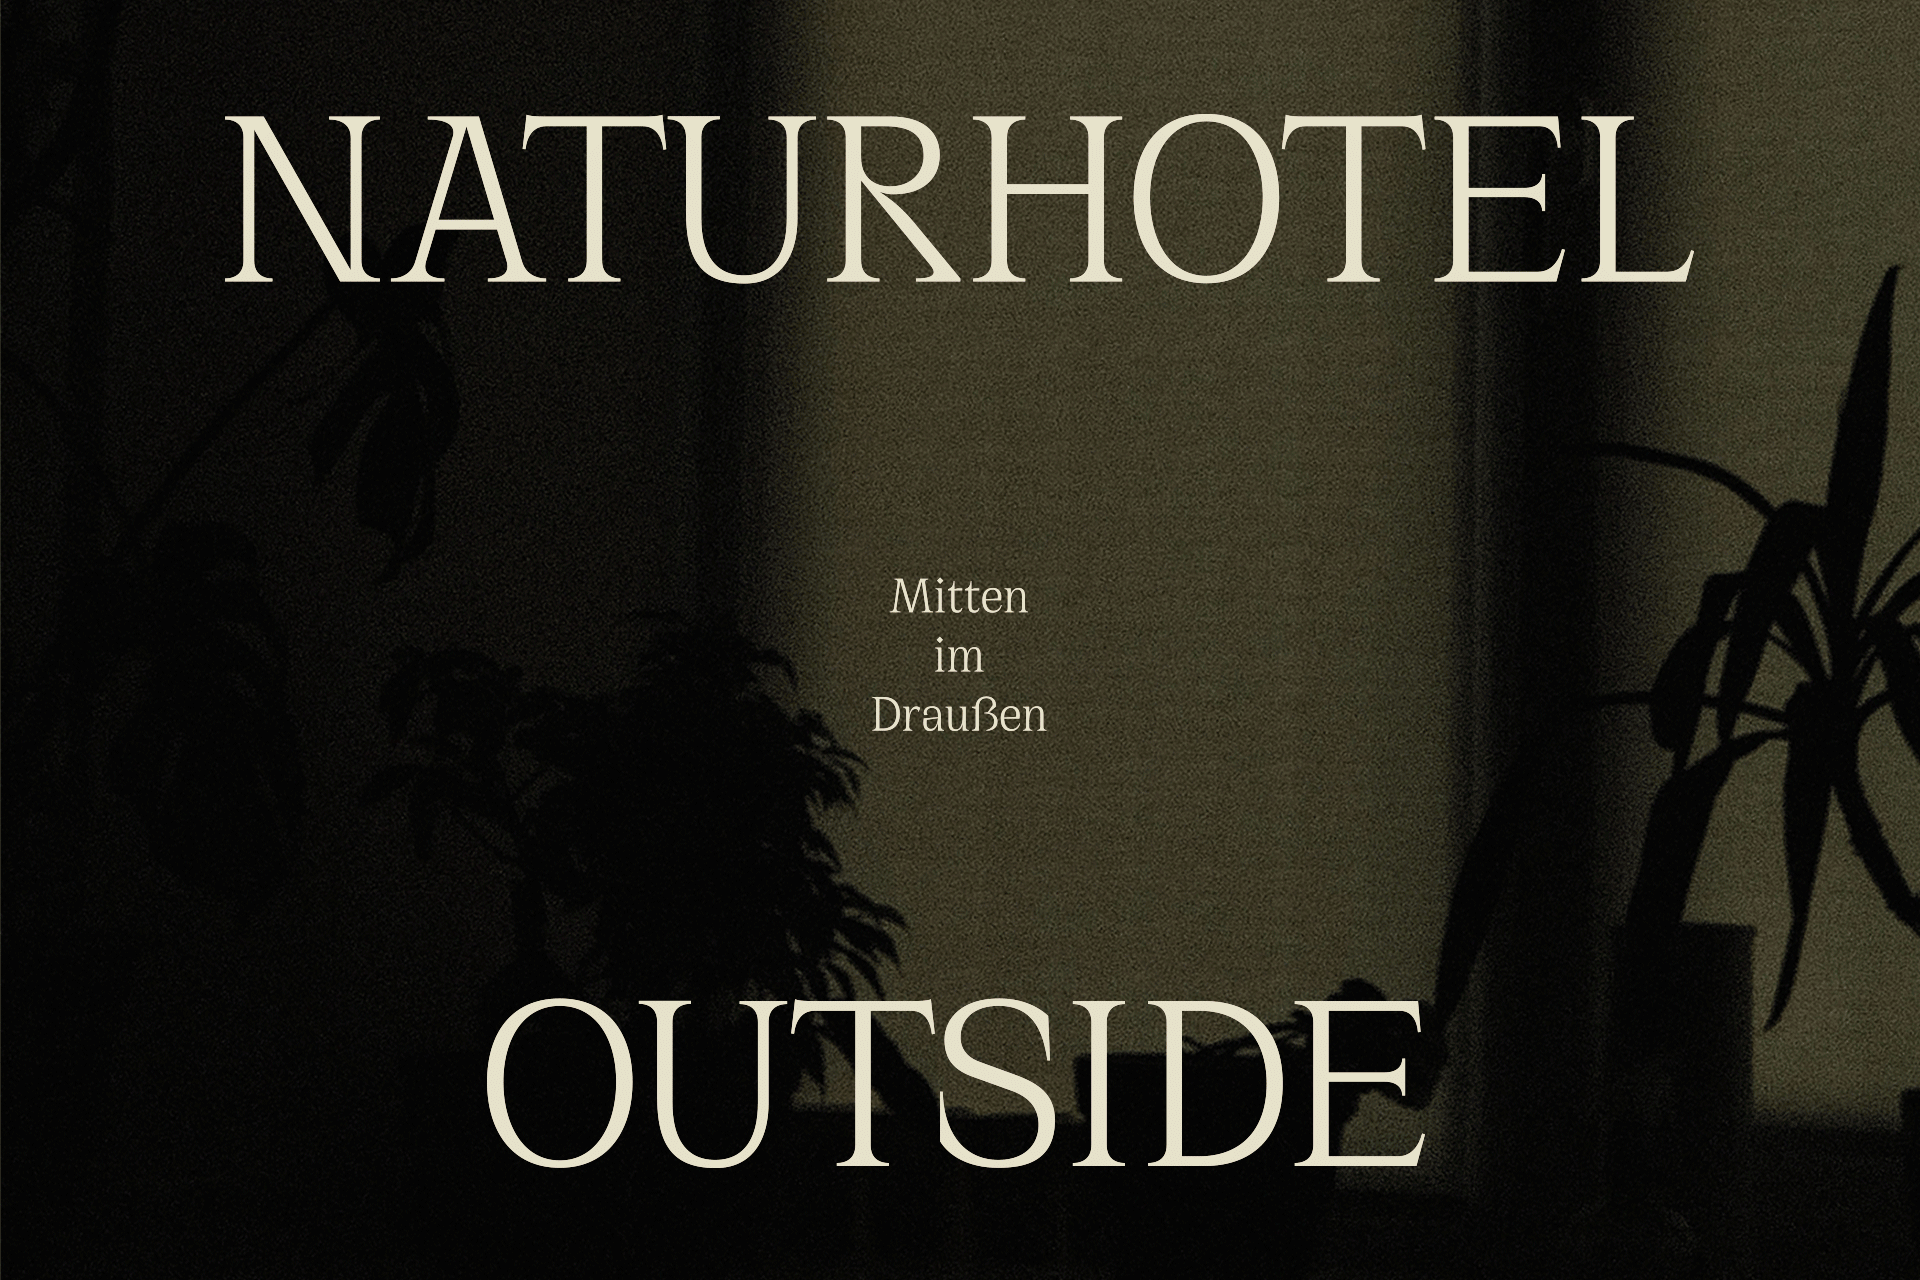 Naturhotel Outside – In the midst of the outdoors